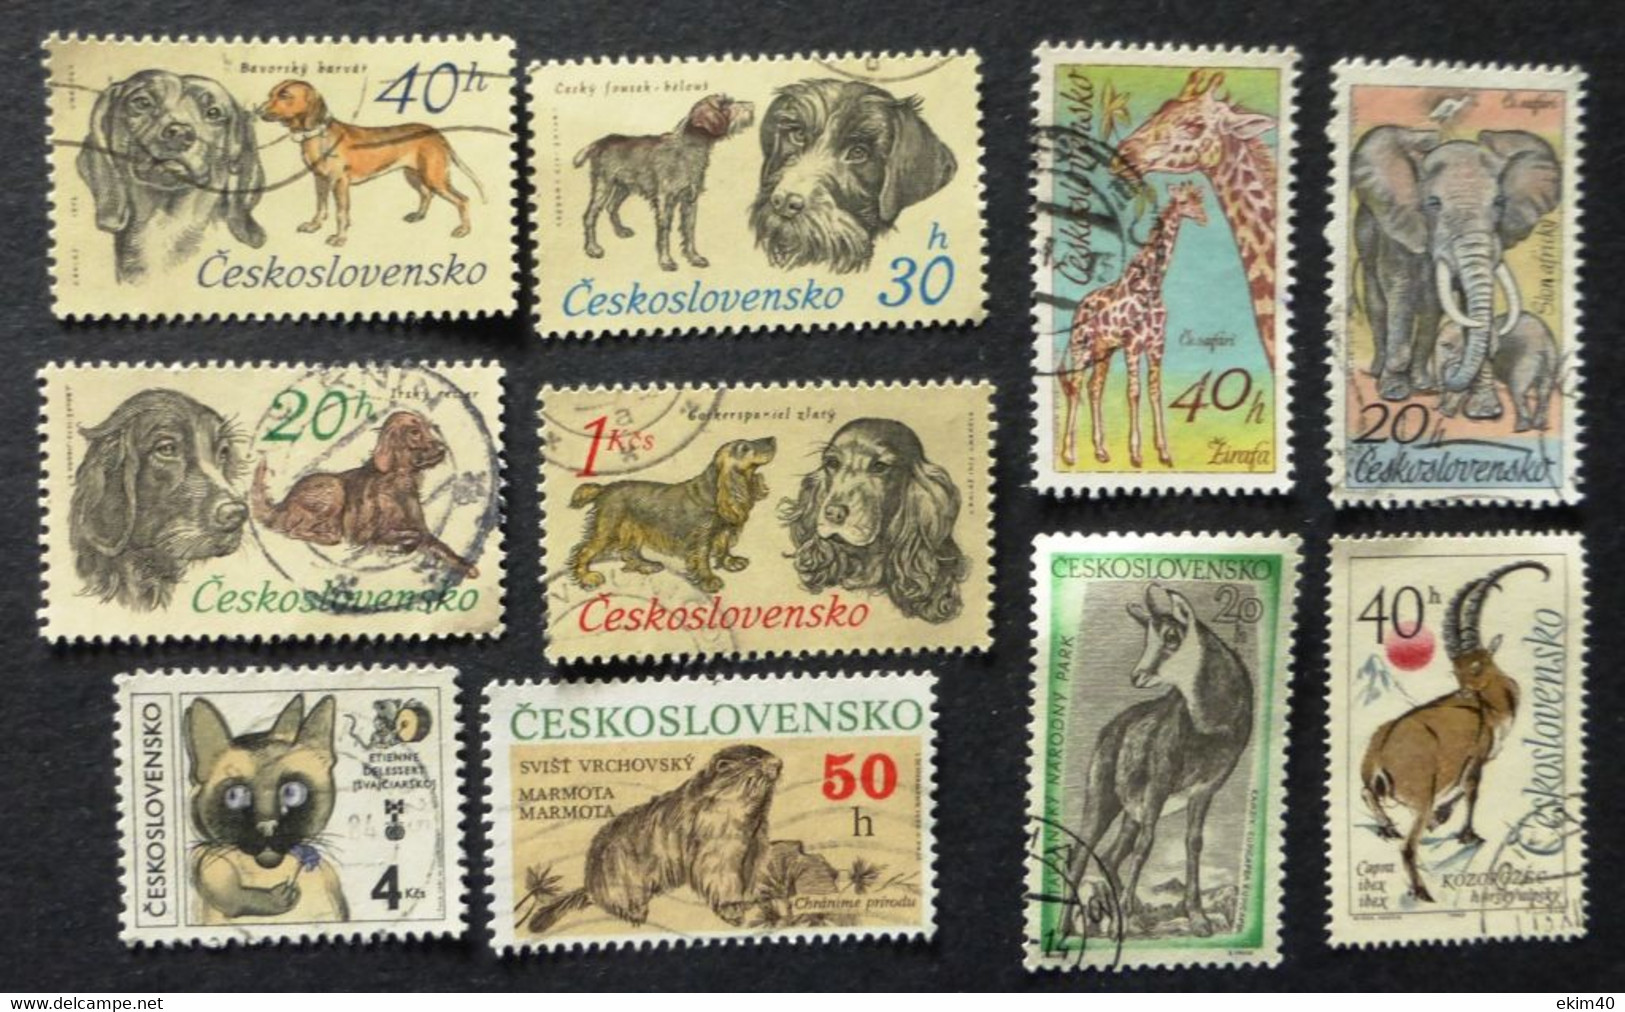 Selection Of Used/Cancelled Stamps From Czechoslovakia Wild & Domestic Animals. No DC-323 - Gebruikt